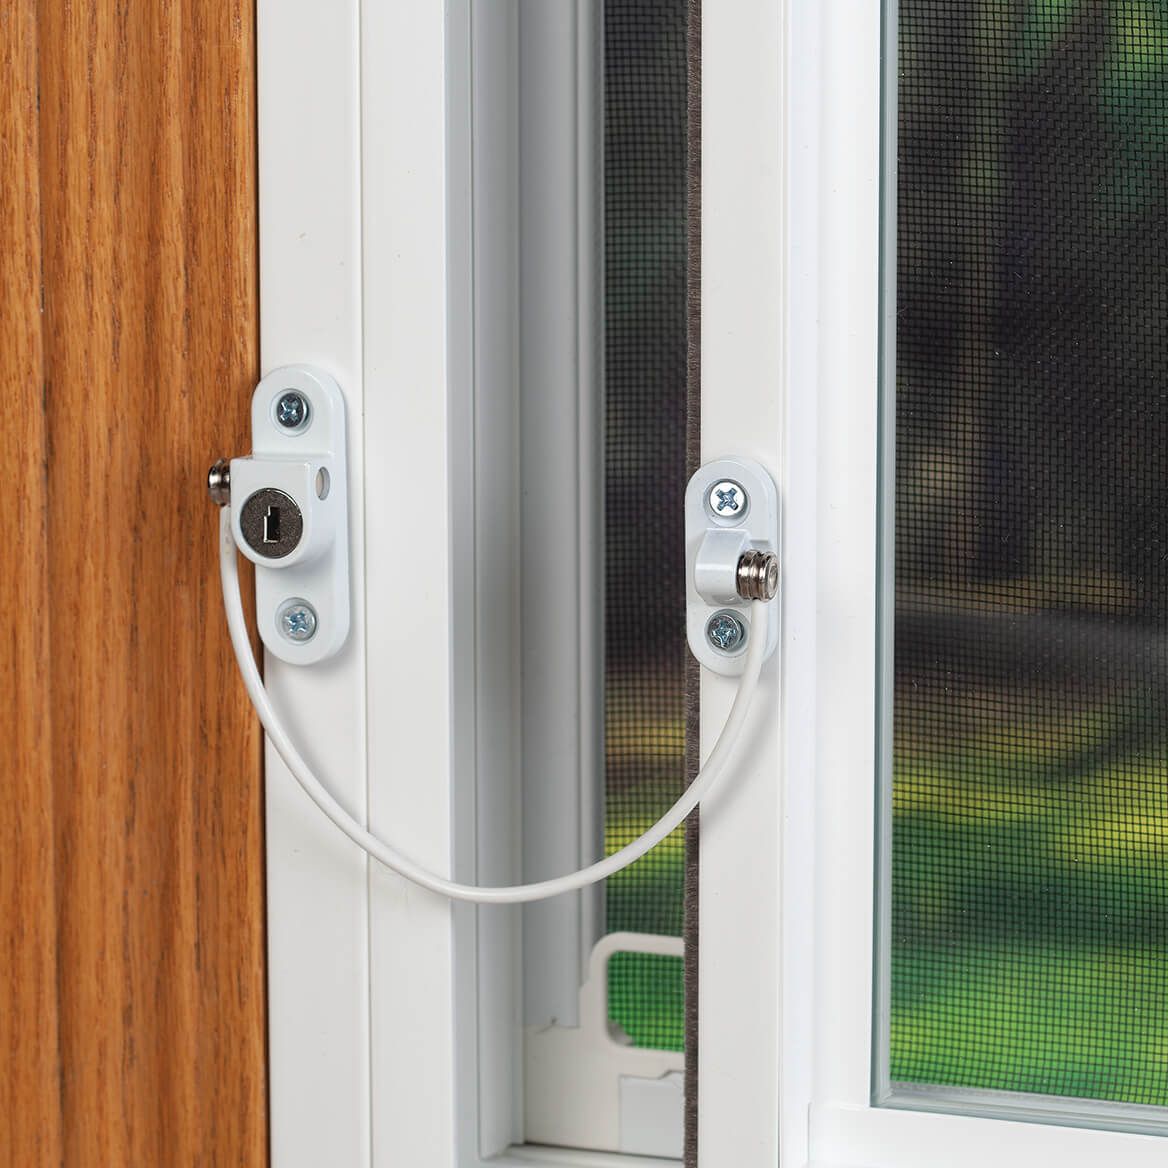 Window Safety Cable Lock + '-' + 373588